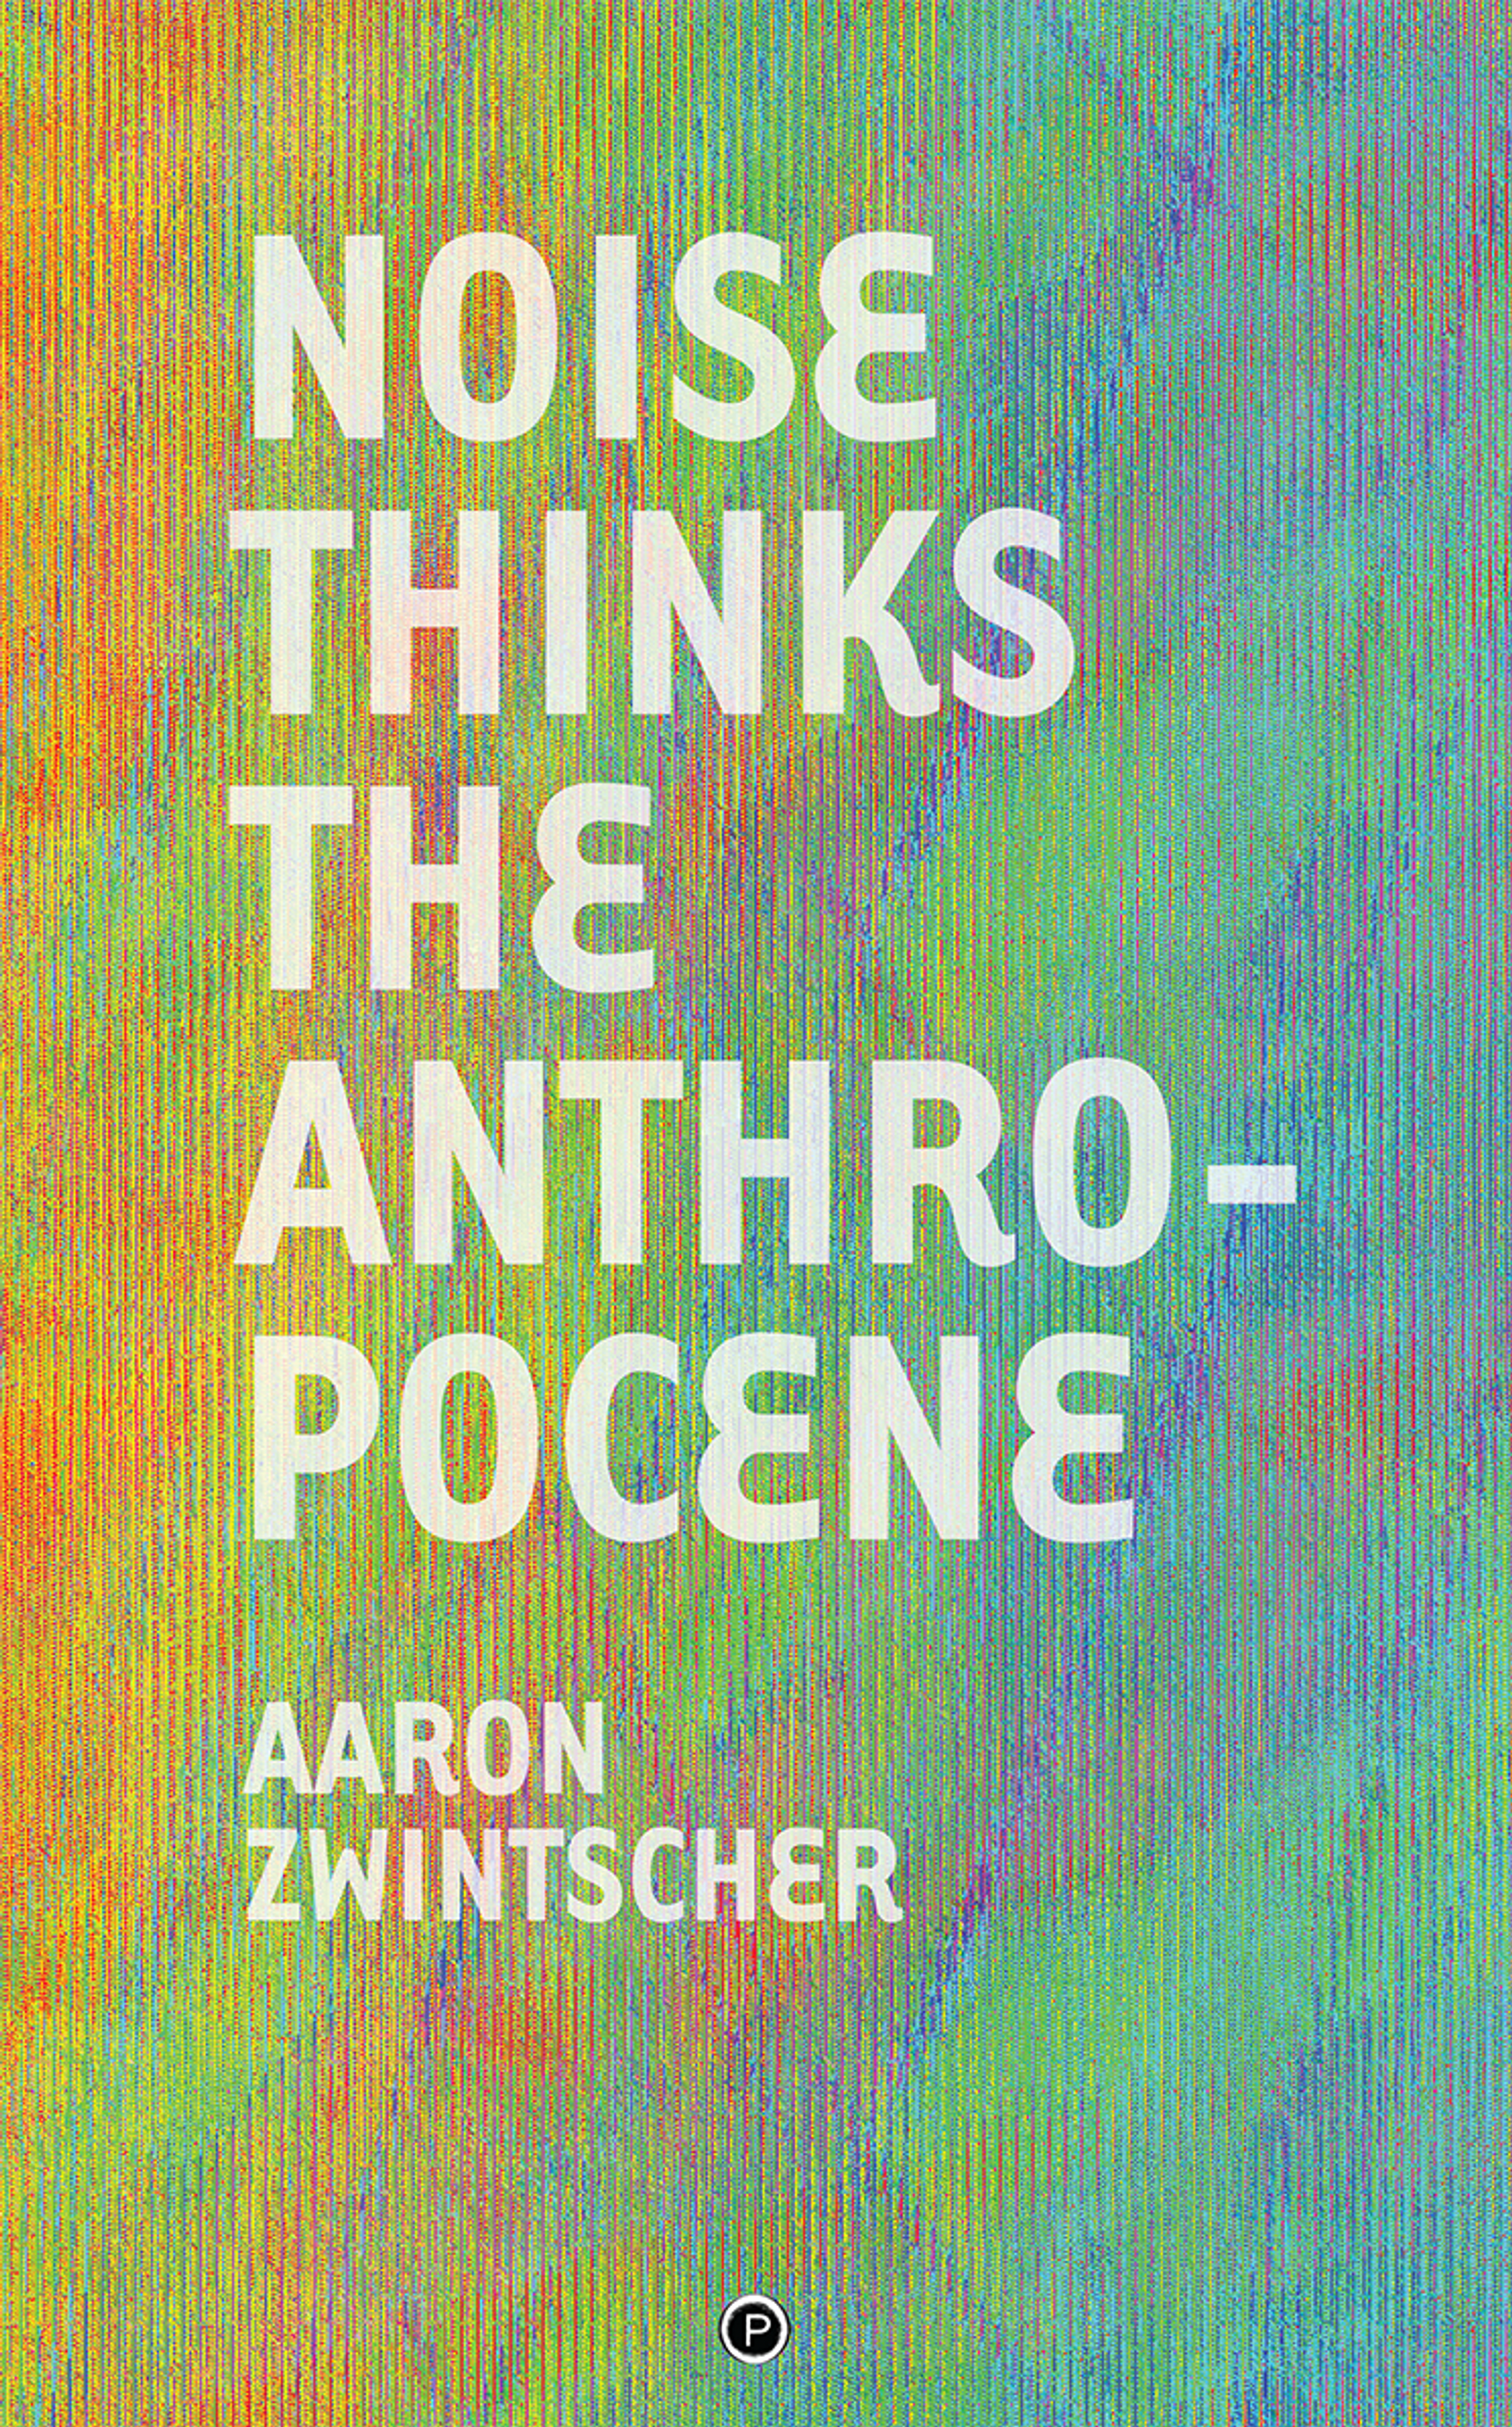 Cover of book titled Noise Thinks the Anthropocene: An Experiment in Noise Poetics